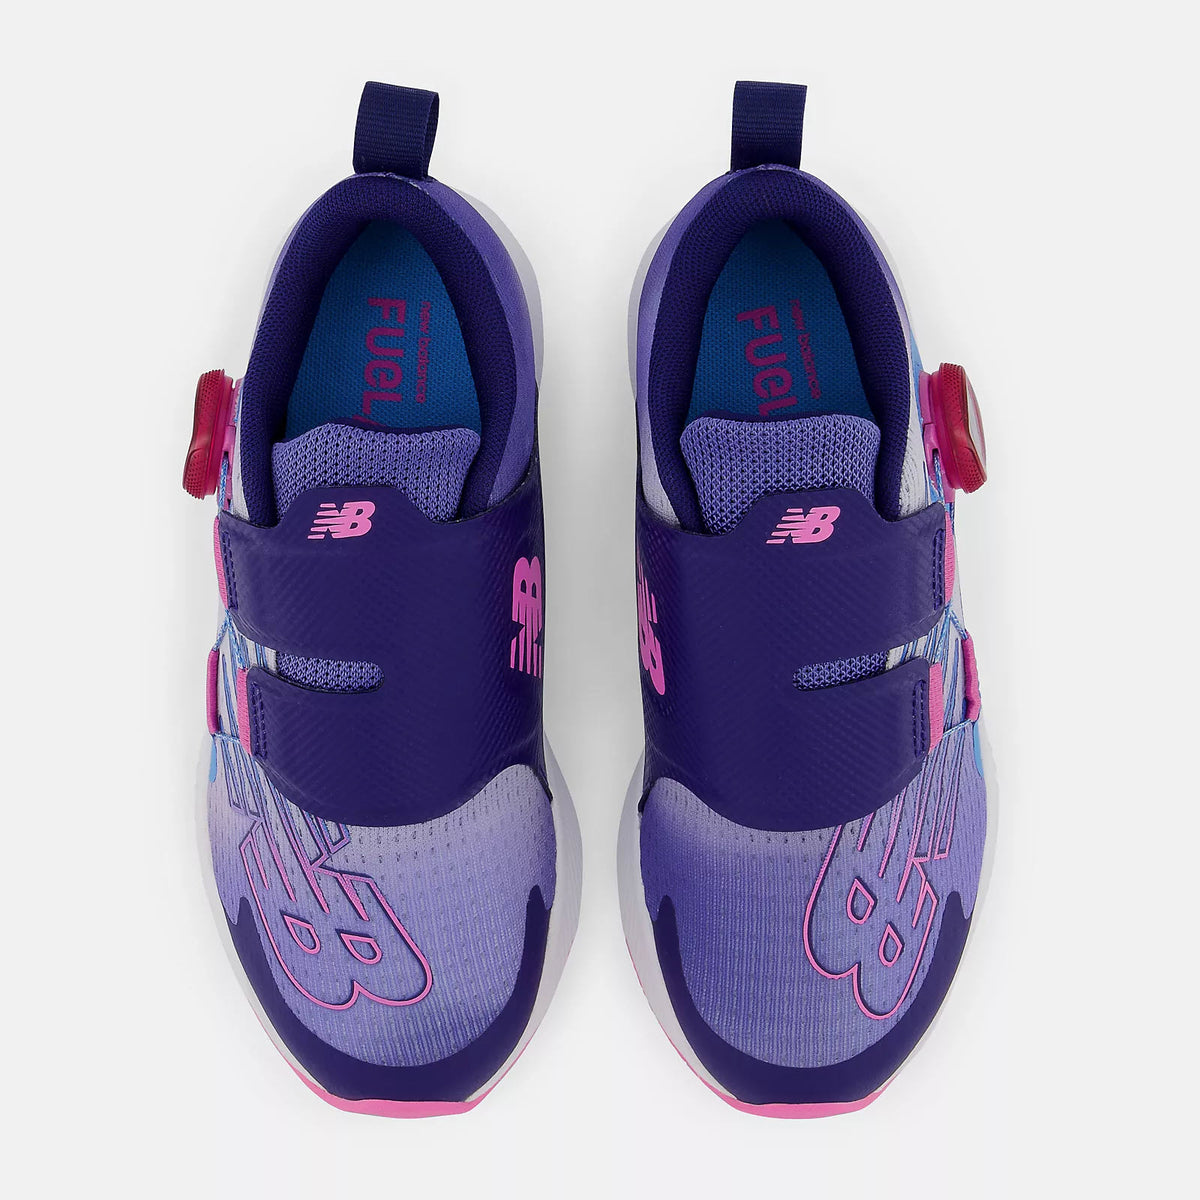 A pair of purple New Balance FuelCore Reveal Boa Vibrant Violet sneakers with Velcro straps, viewed from above.